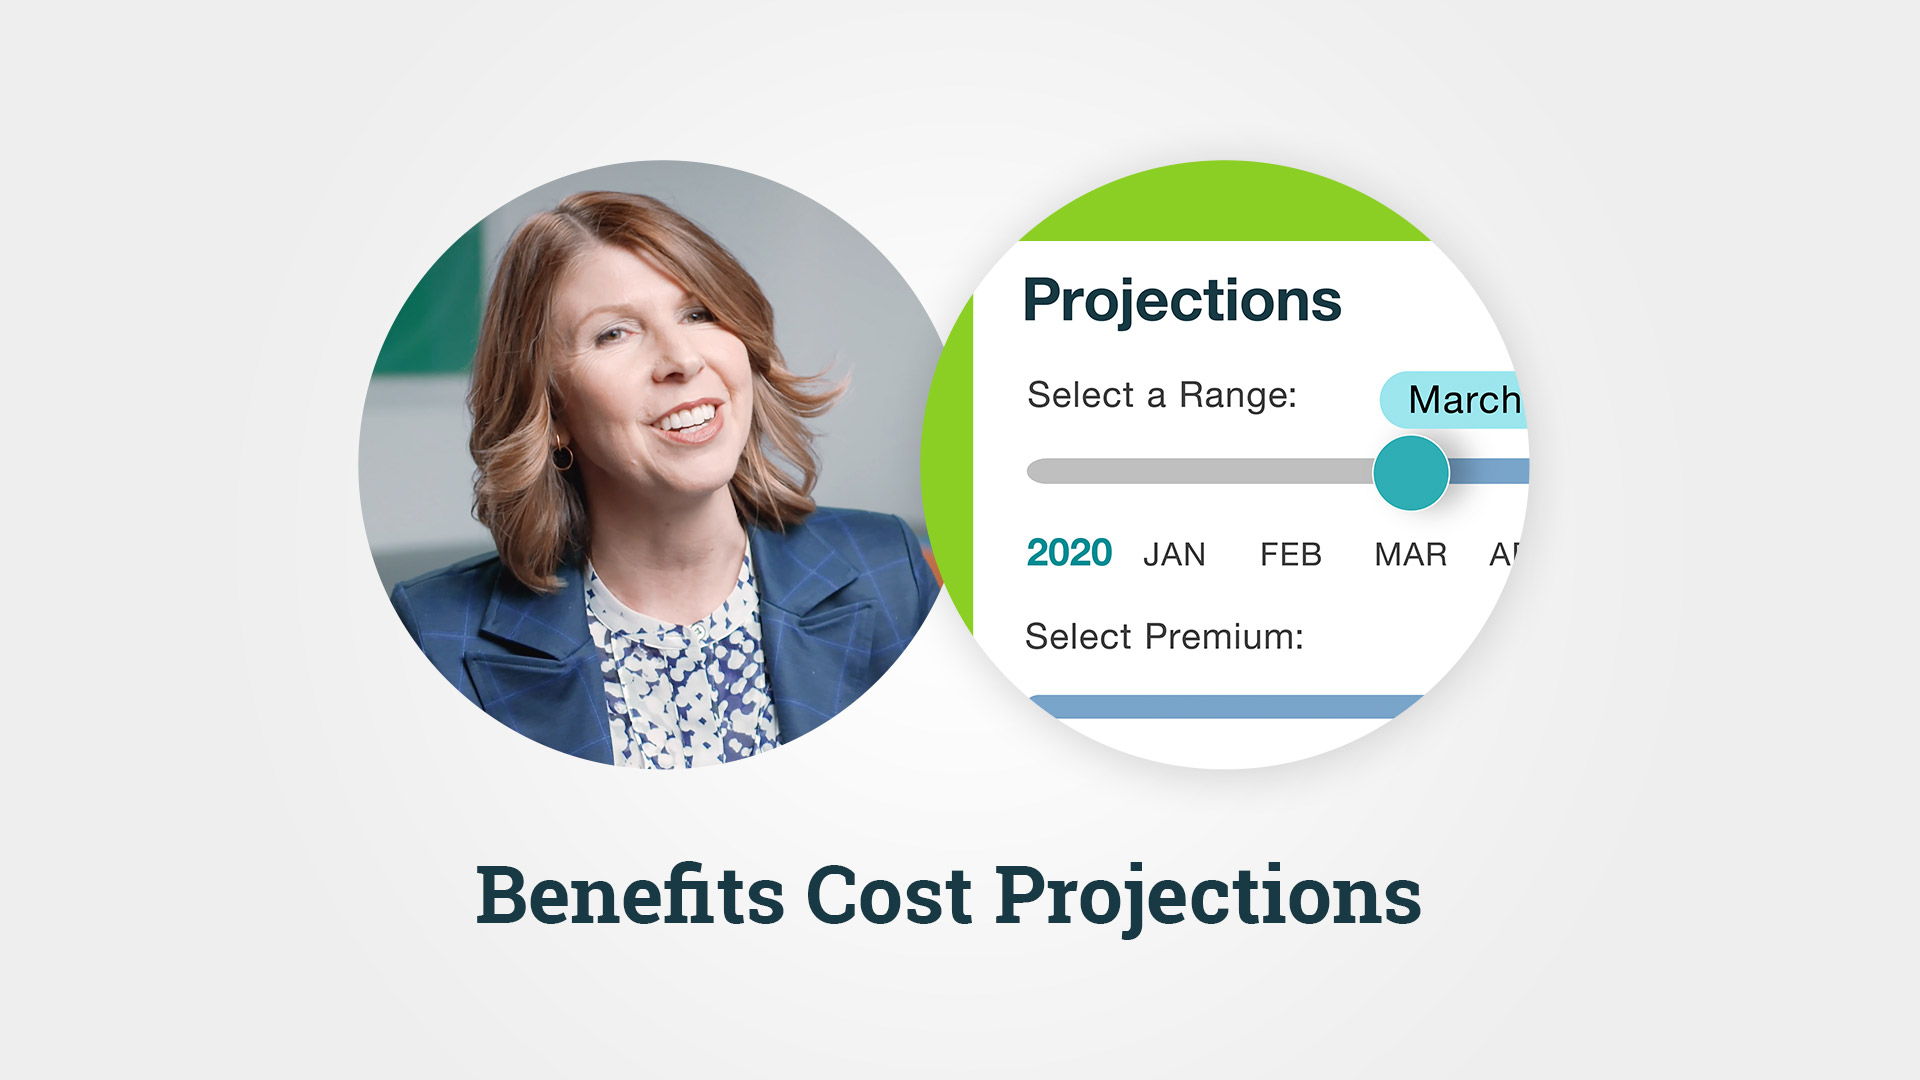 Benefits Cost Projections